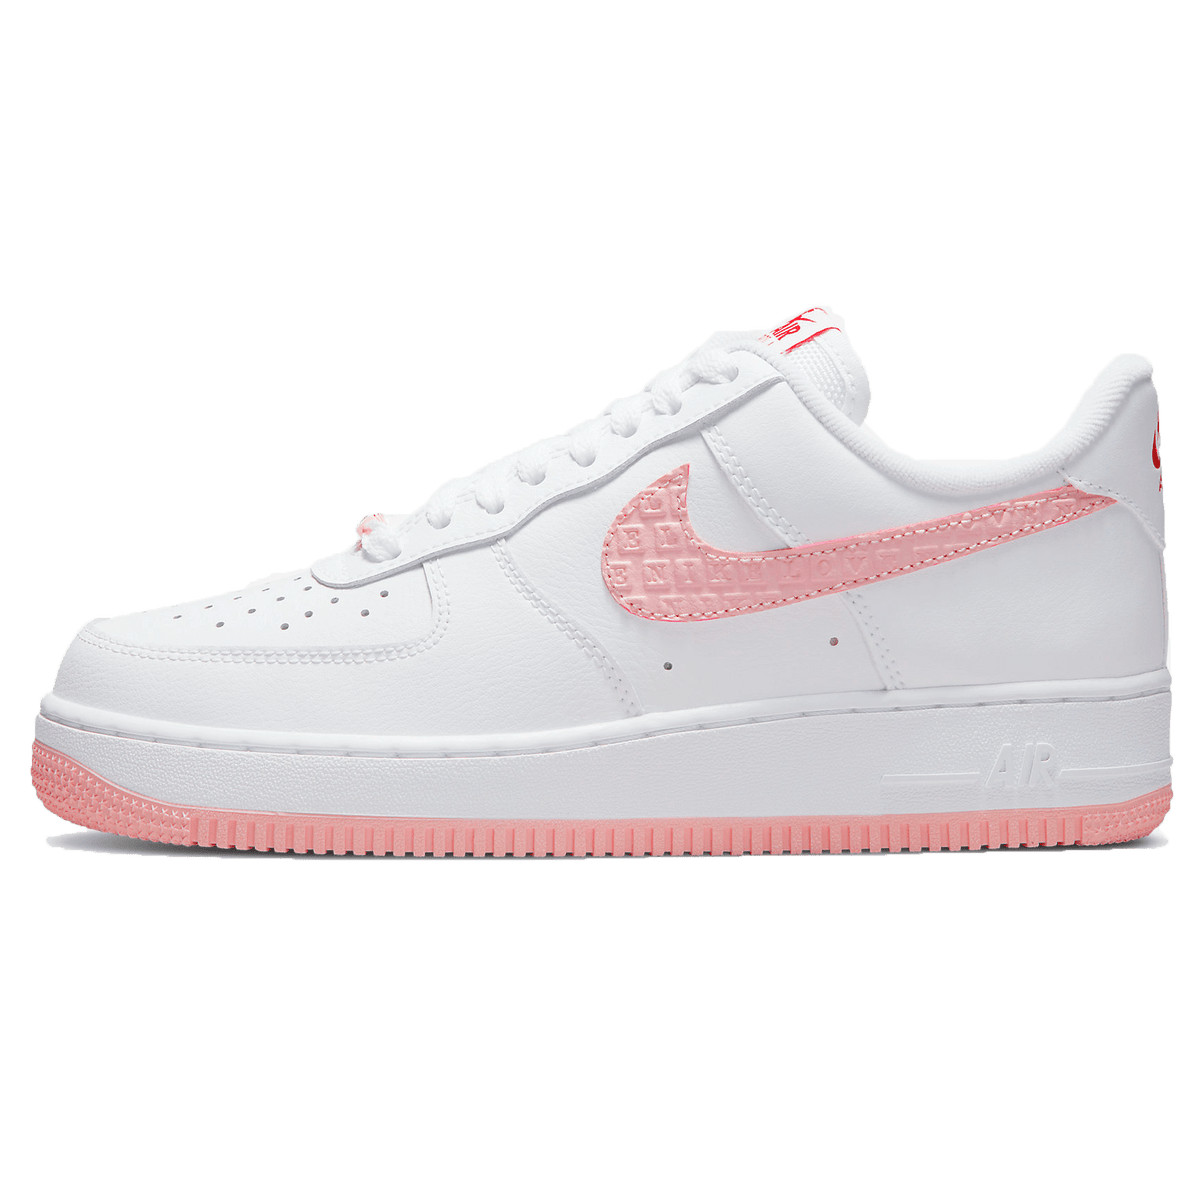 Nike bright nike air max size 4 youth Low Wmns 'Valentine's Day 2022' - JuzsportsShops